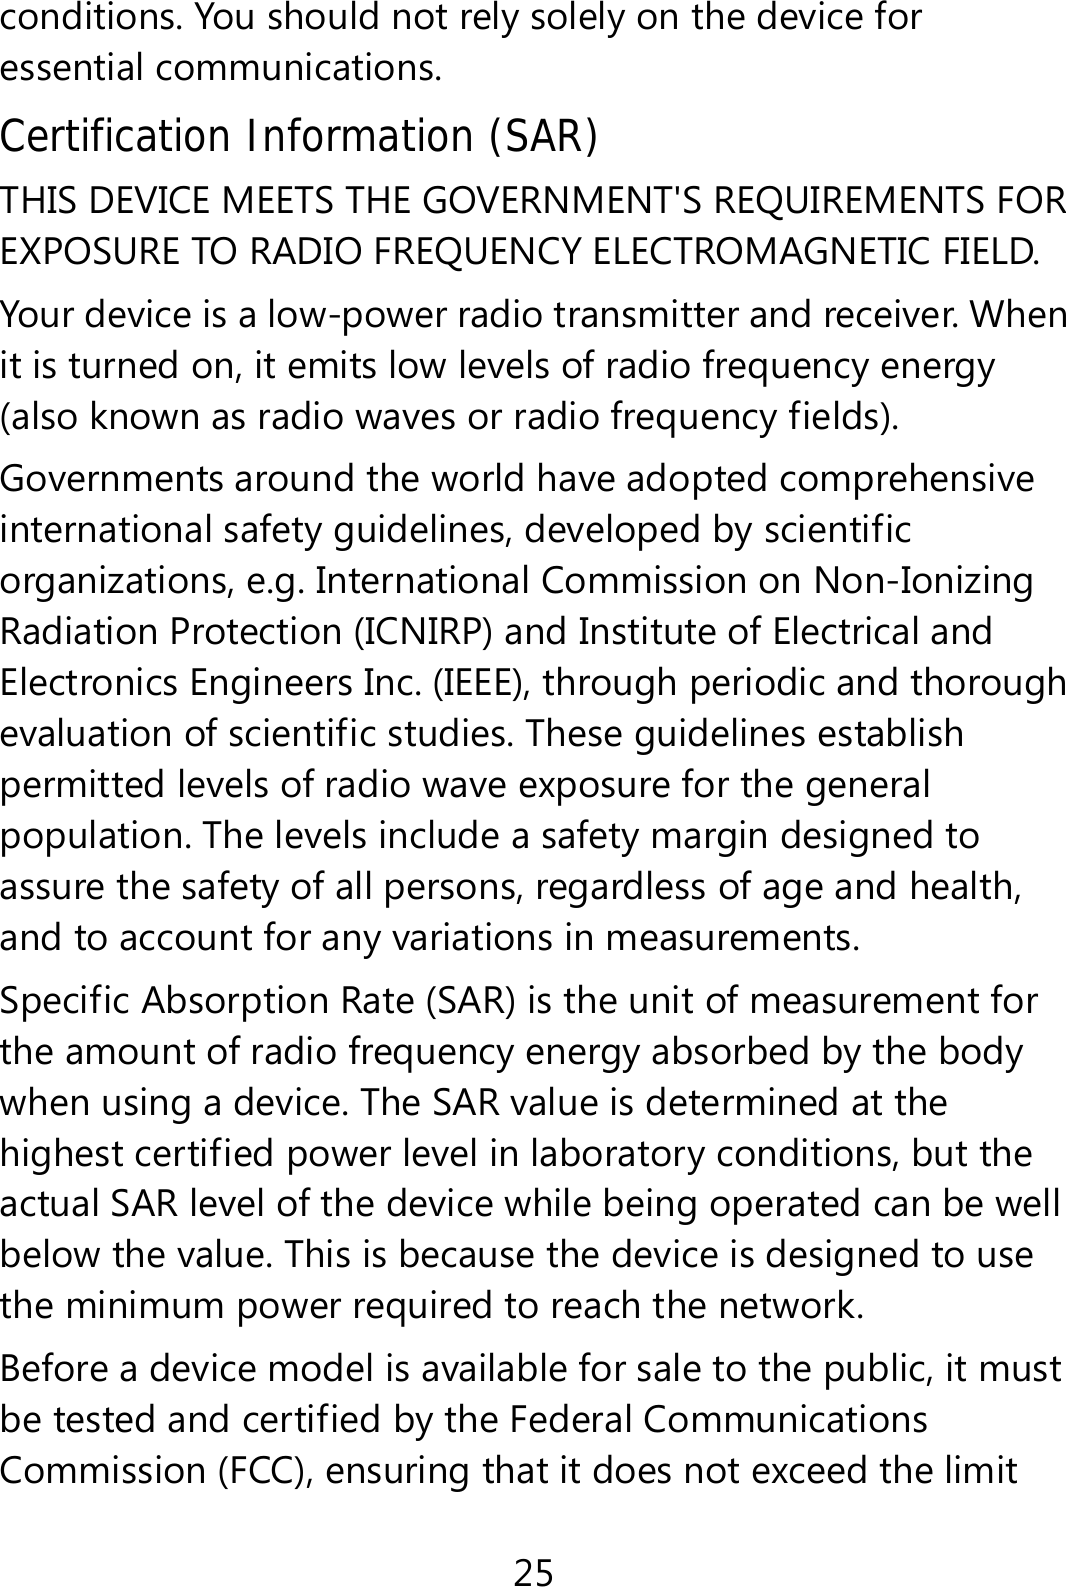 25 conditions. You should not rely solely on the device for essential communications. Certification Information (SAR) THIS DEVICE MEETS THE GOVERNMENT&apos;S REQUIREMENTS FOR EXPOSURE TO RADIO FREQUENCY ELECTROMAGNETIC FIELD. Your device is a low-power radio transmitter and receiver. When it is turned on, it emits low levels of radio frequency energy (also known as radio waves or radio frequency fields). Governments around the world have adopted comprehensive international safety guidelines, developed by scientific organizations, e.g. International Commission on Non-Ionizing Radiation Protection (ICNIRP) and Institute of Electrical and Electronics Engineers Inc. (IEEE), through periodic and thorough evaluation of scientific studies. These guidelines establish permitted levels of radio wave exposure for the general population. The levels include a safety margin designed to assure the safety of all persons, regardless of age and health, and to account for any variations in measurements. Specific Absorption Rate (SAR) is the unit of measurement for the amount of radio frequency energy absorbed by the body when using a device. The SAR value is determined at the highest certified power level in laboratory conditions, but the actual SAR level of the device while being operated can be well below the value. This is because the device is designed to use the minimum power required to reach the network. Before a device model is available for sale to the public, it must be tested and certified by the Federal Communications Commission (FCC), ensuring that it does not exceed the limit 